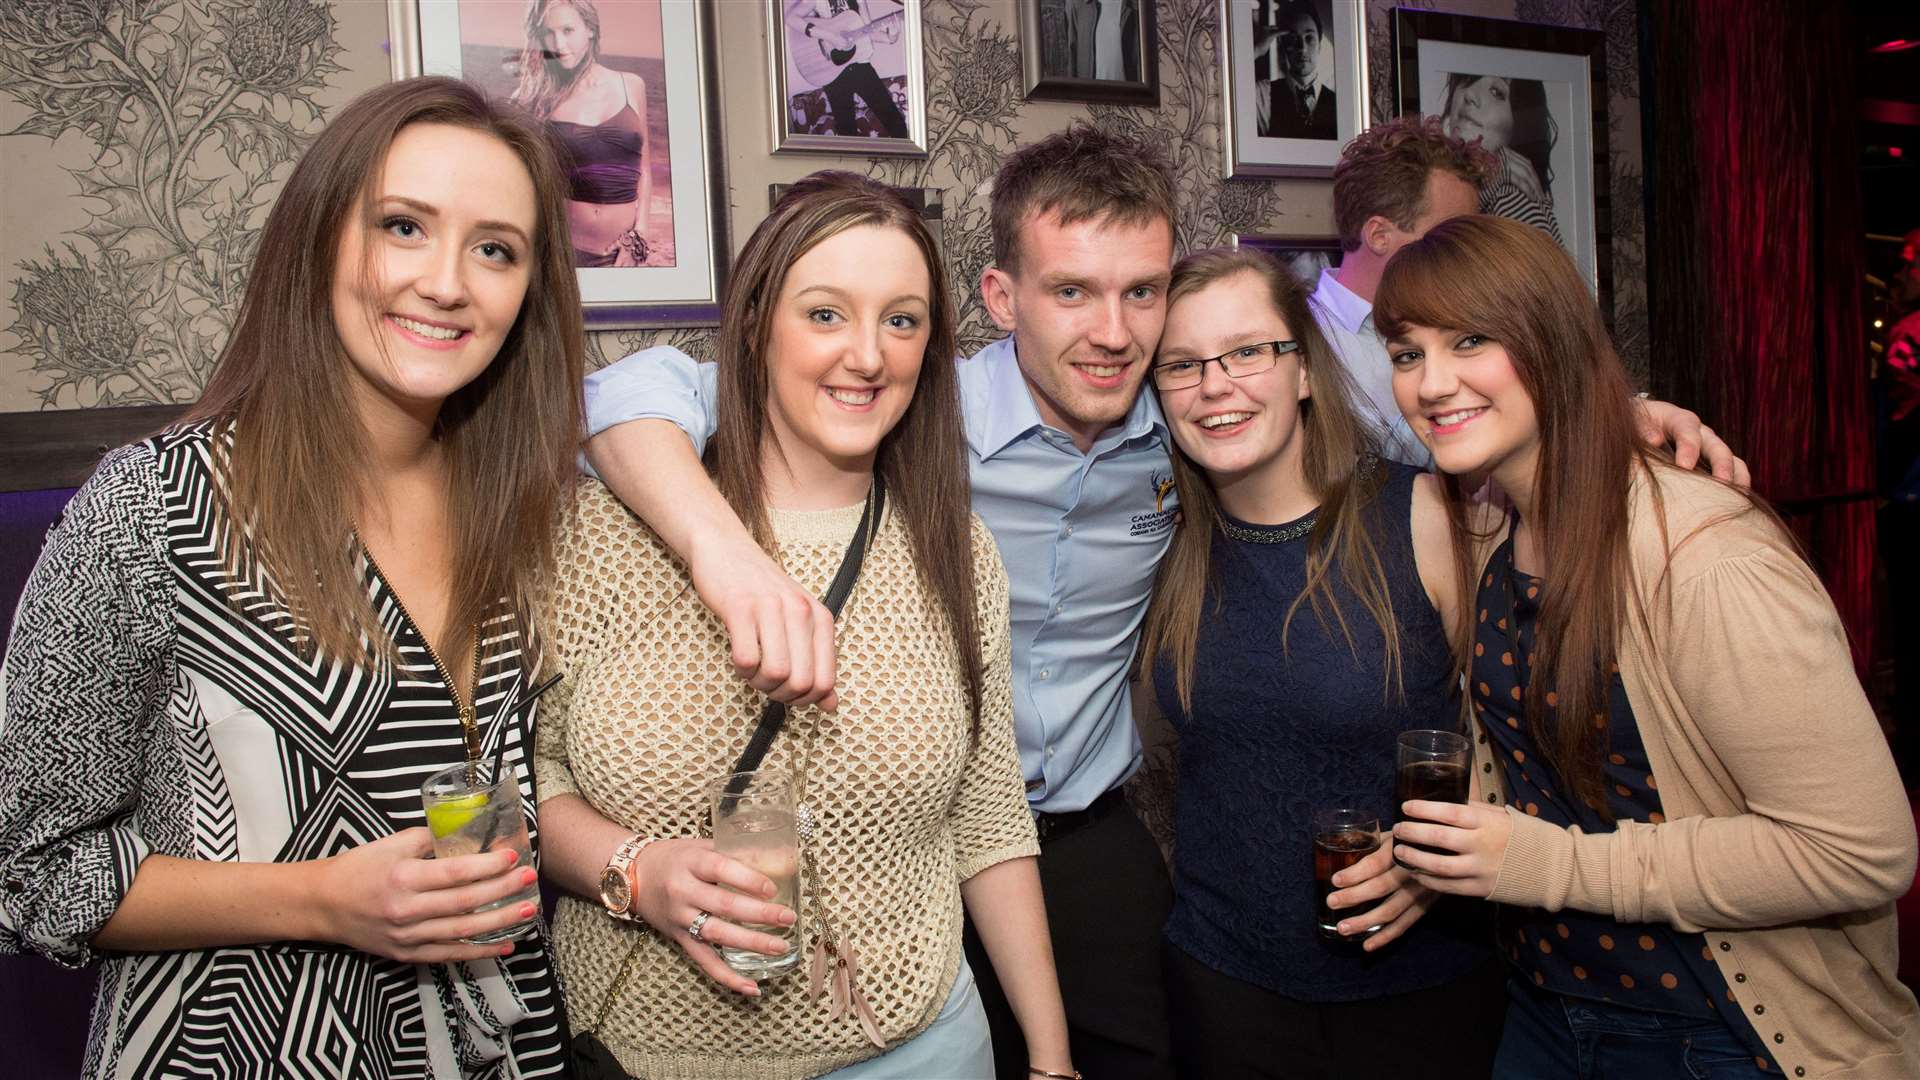 In the Den are (left to right) Emma Crawford, Caroline Maclean, Stuart Macdonald, Laura Gallacher and Joanne Cumming.